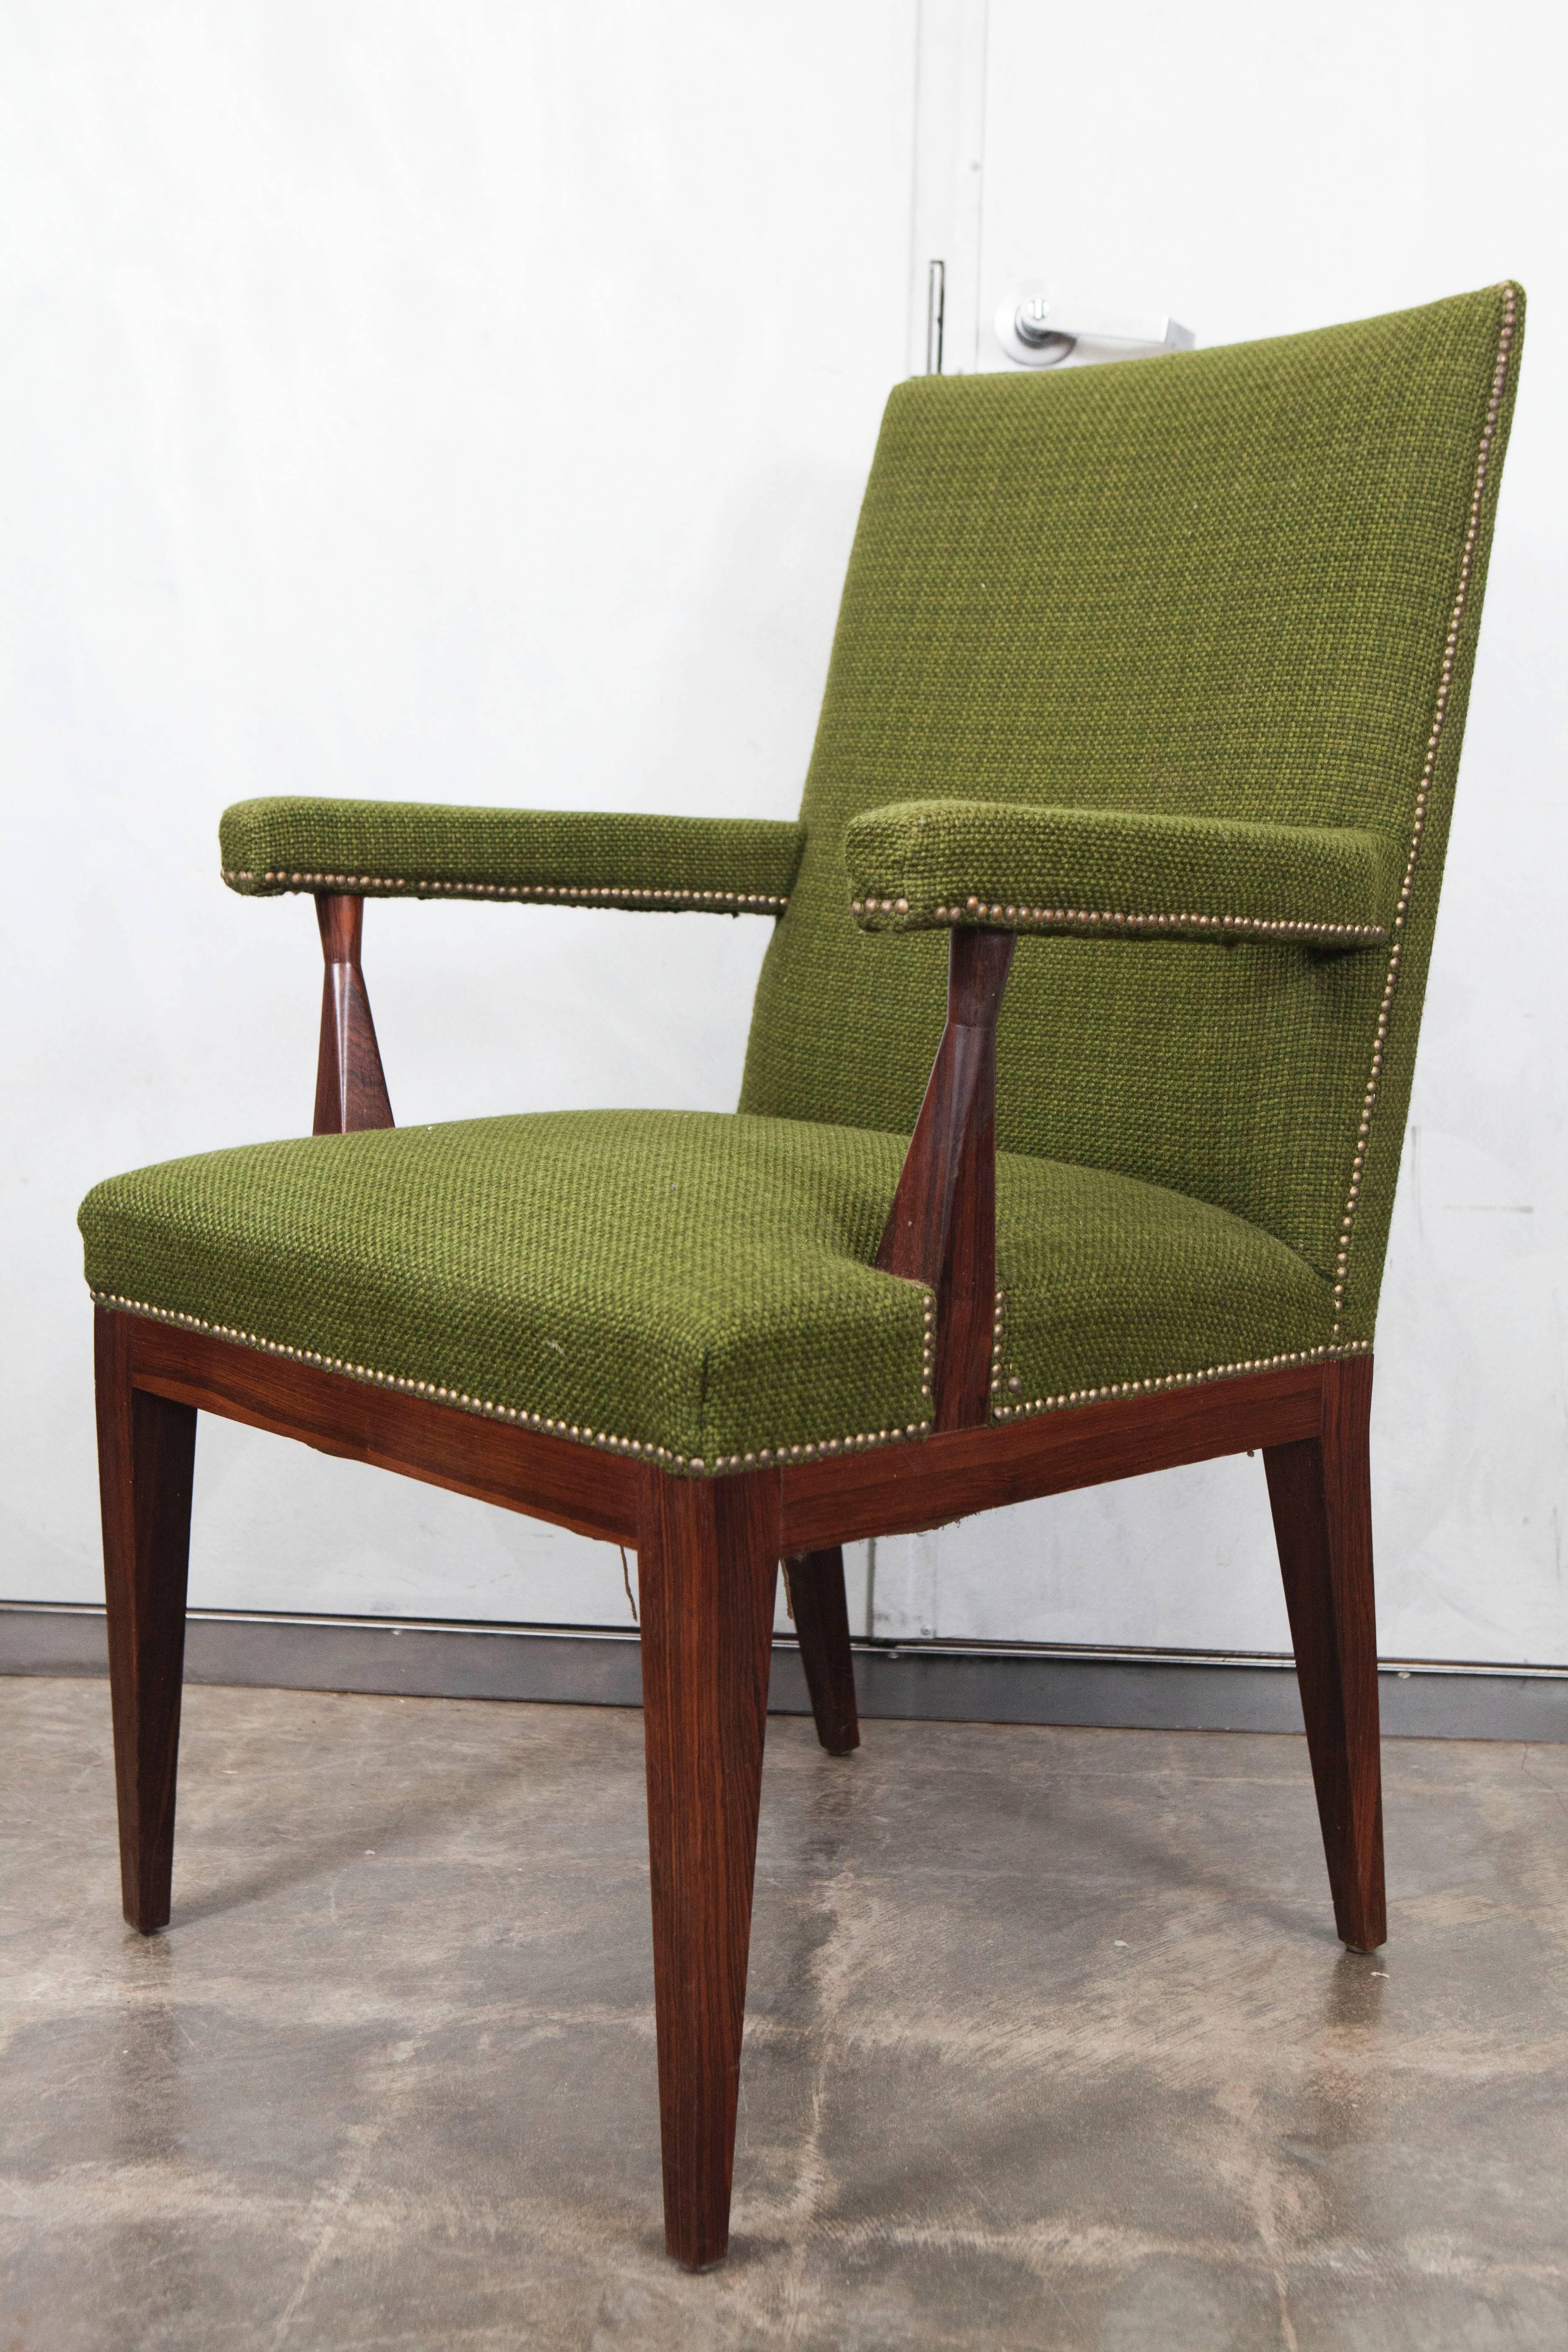 This pair of Mid-Century armchairs are made of rosewood and upholstered in a vintage green fabric. Based on their style and materials we believe they were designed and produced in Scandinavia in the 1950s. 